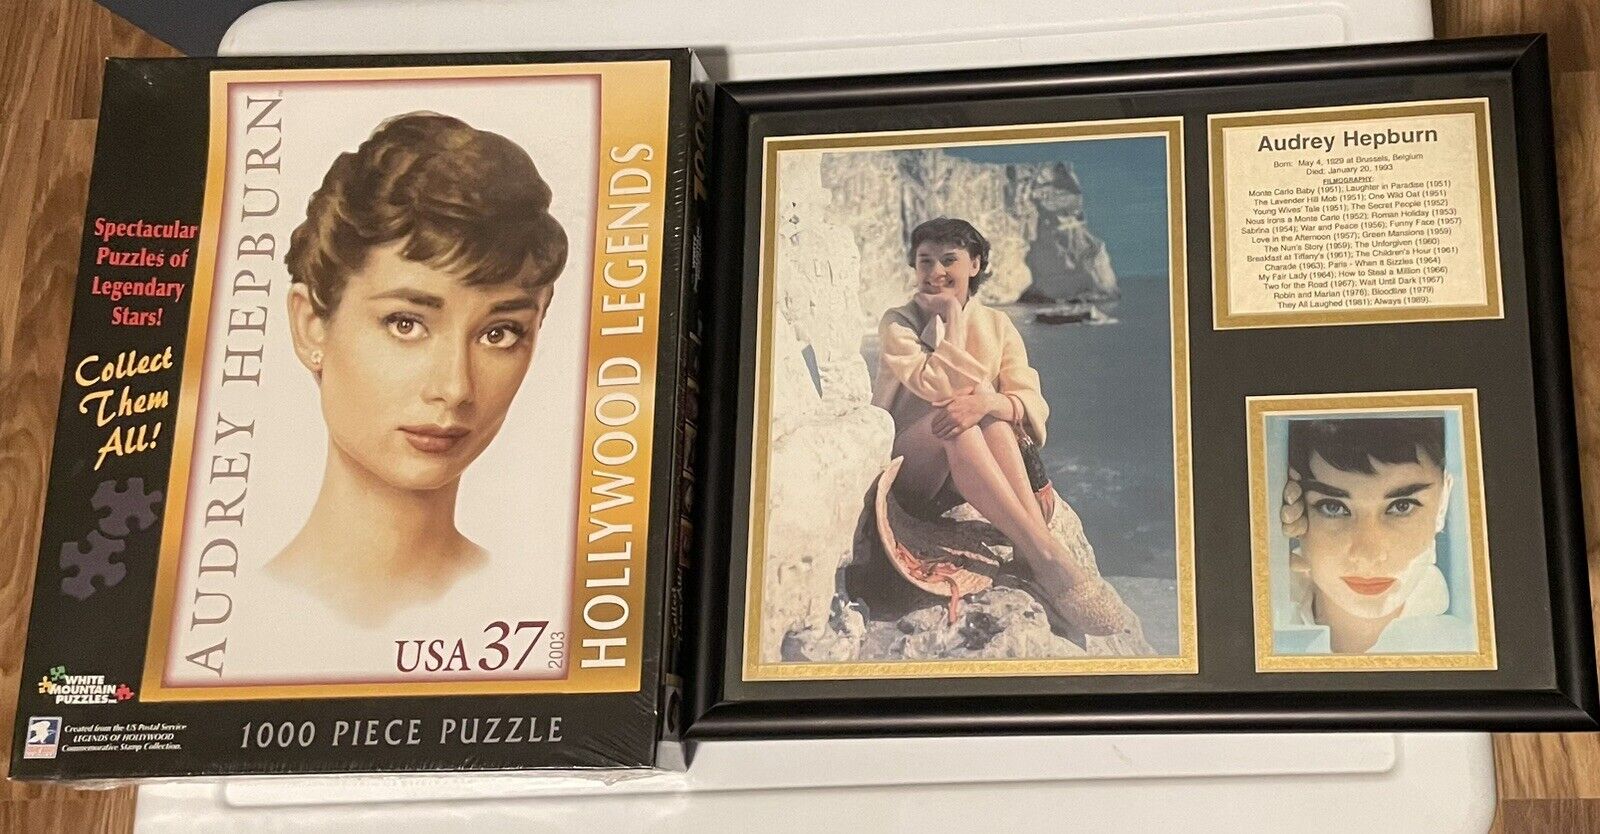 Audrey Hepburn Framed Matted Collector\'s Photo Collage w/Bio & Collectors Puzzle